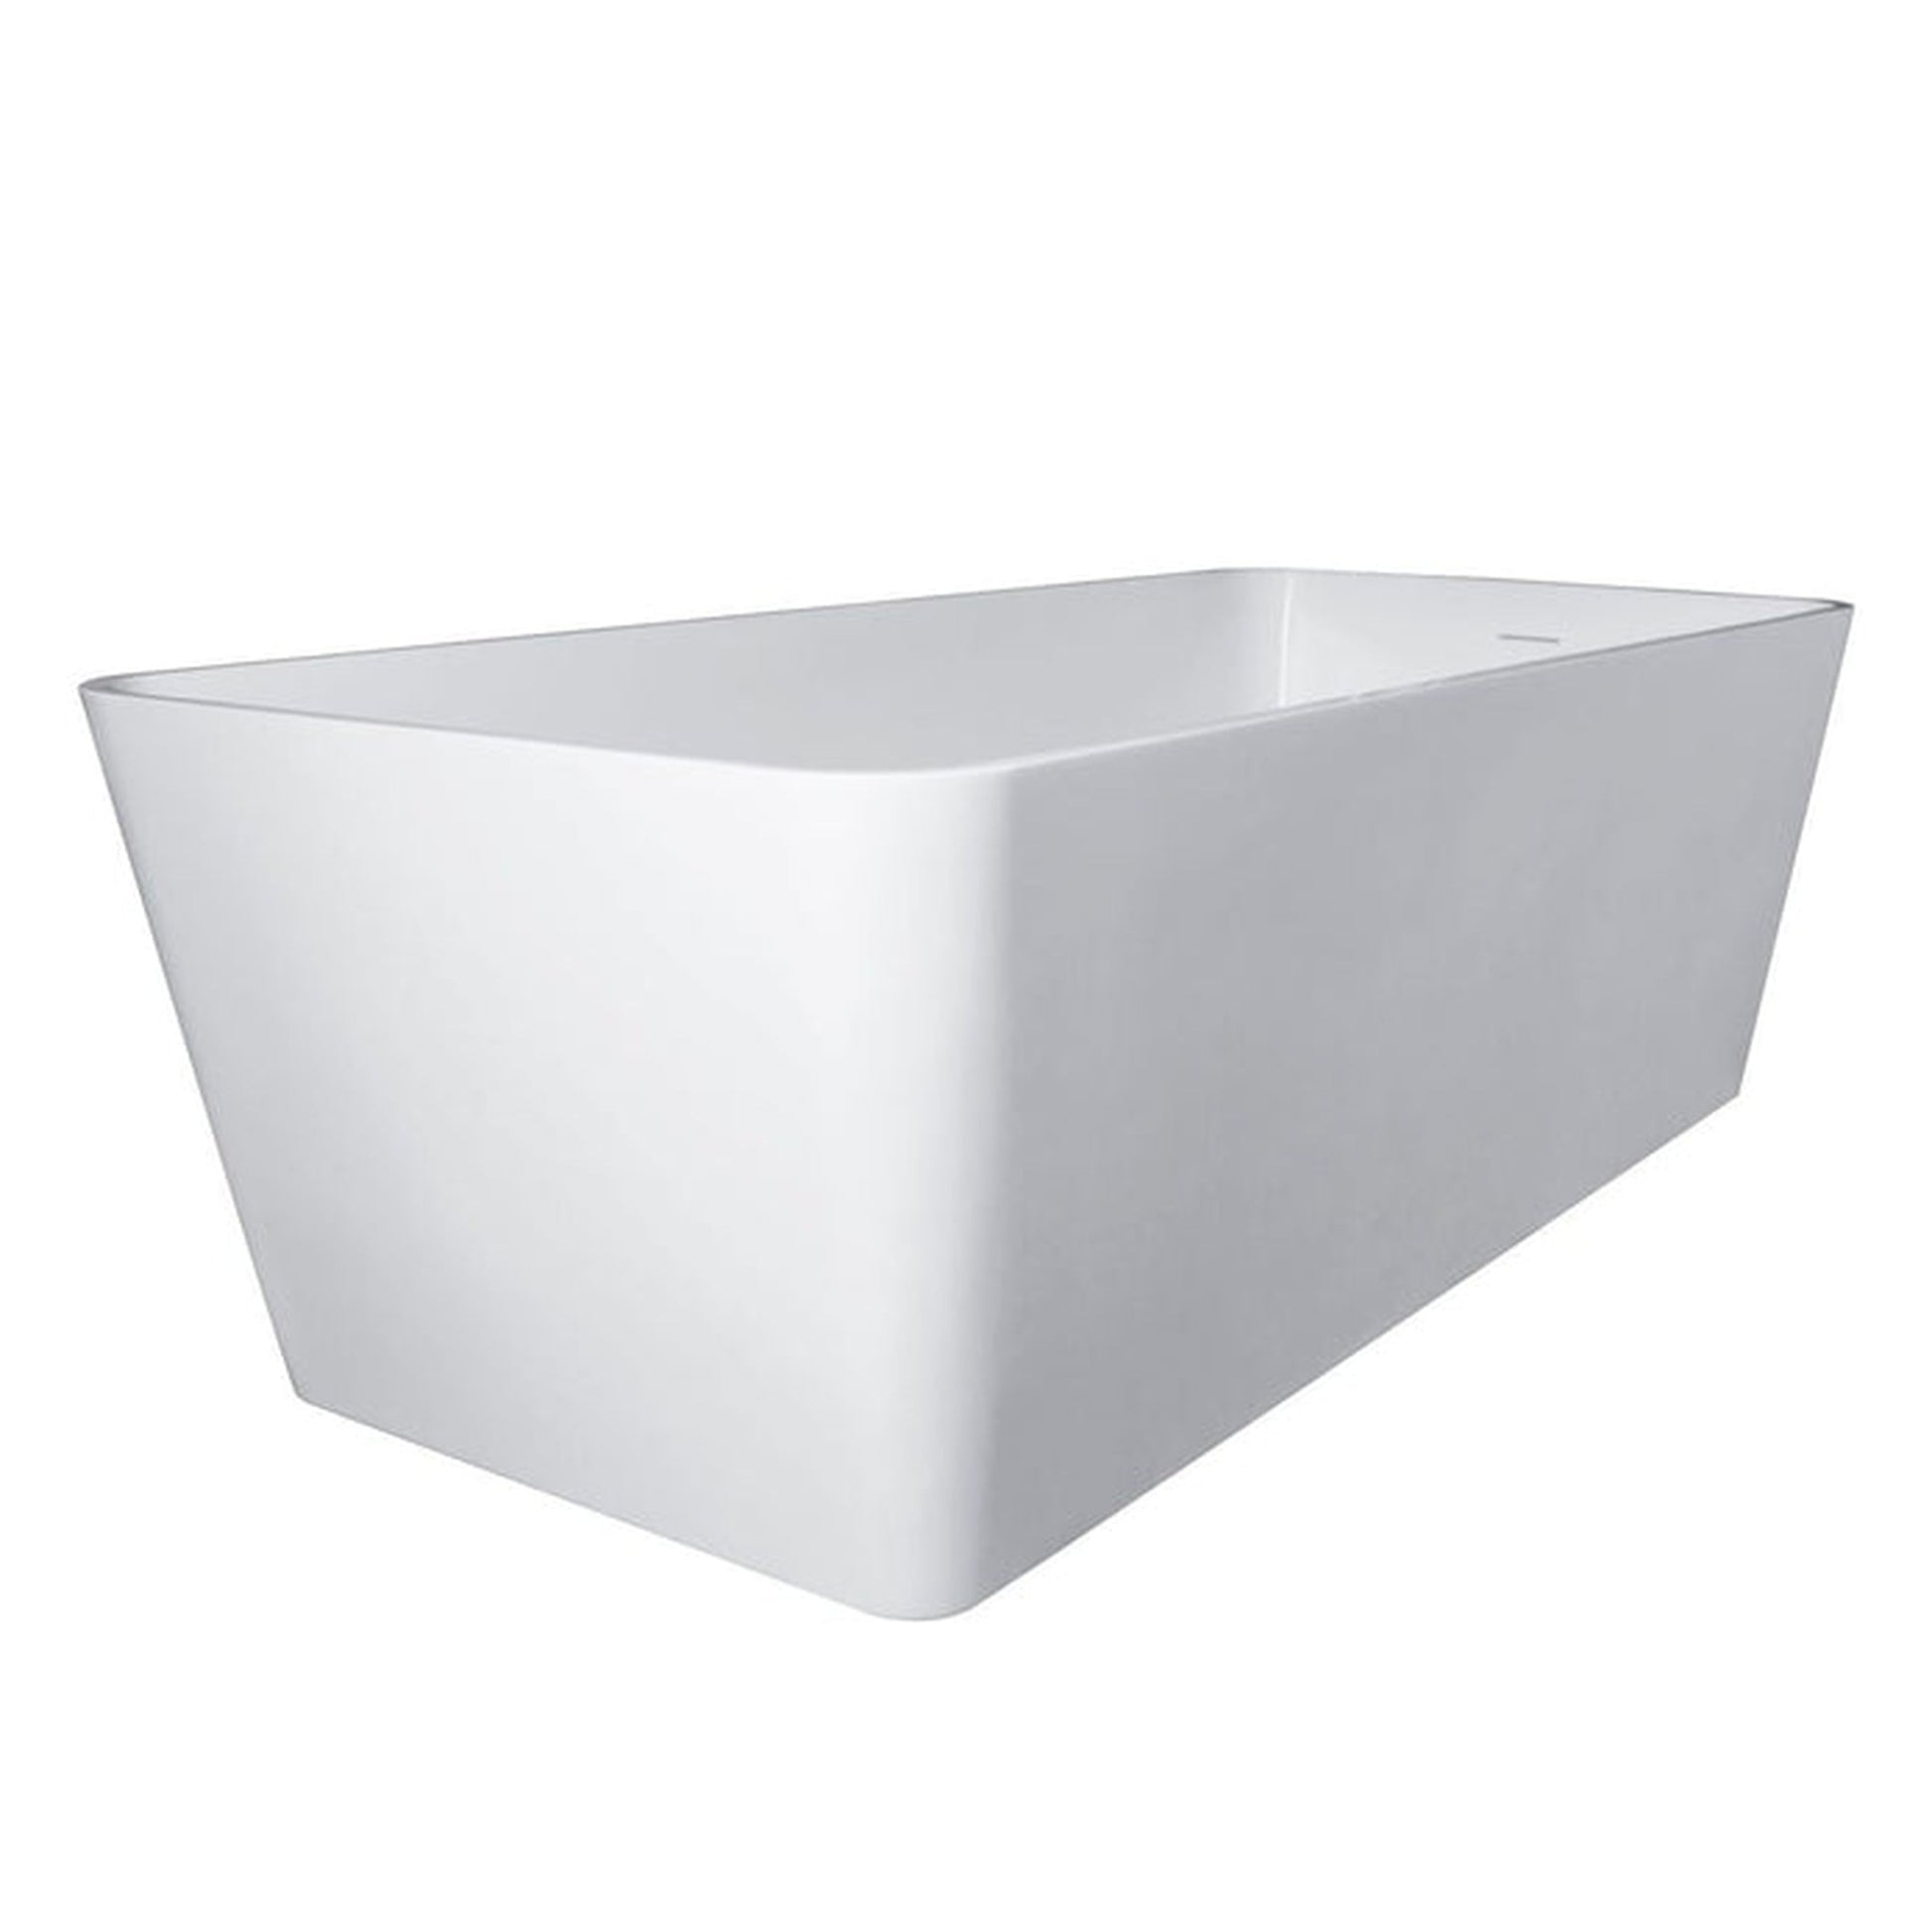 Vanity Art 59" Glossy White Solid Surface Resin Stone Freestanding Soaking Tub With Slotted Overflow and Pop-up Drain